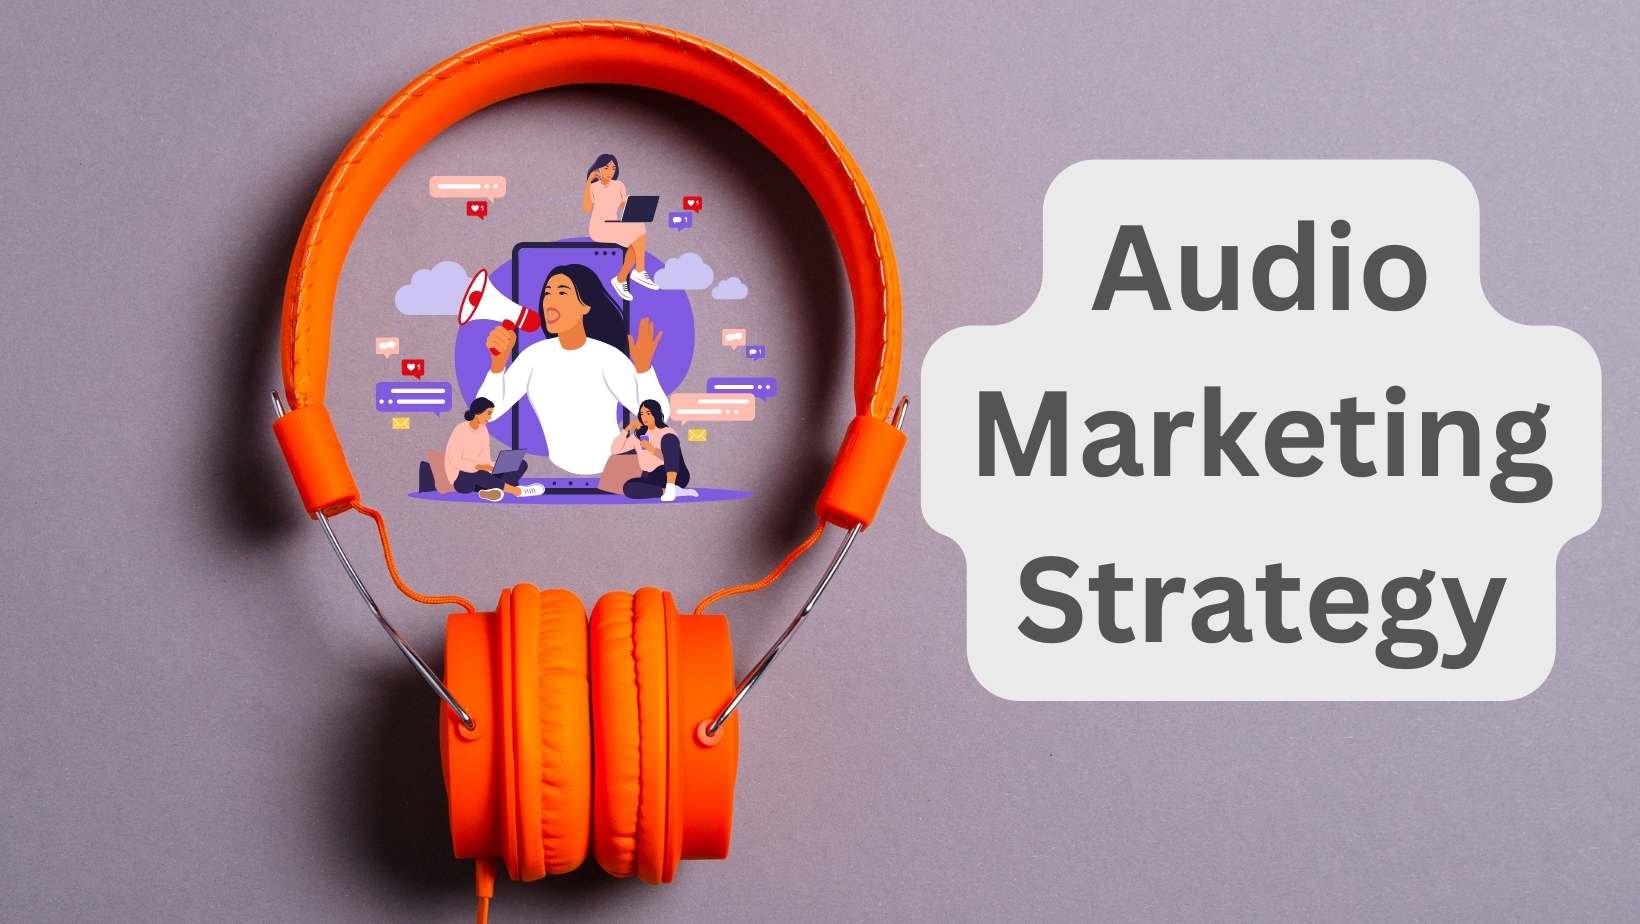 Create your Audio Marketing Strategy